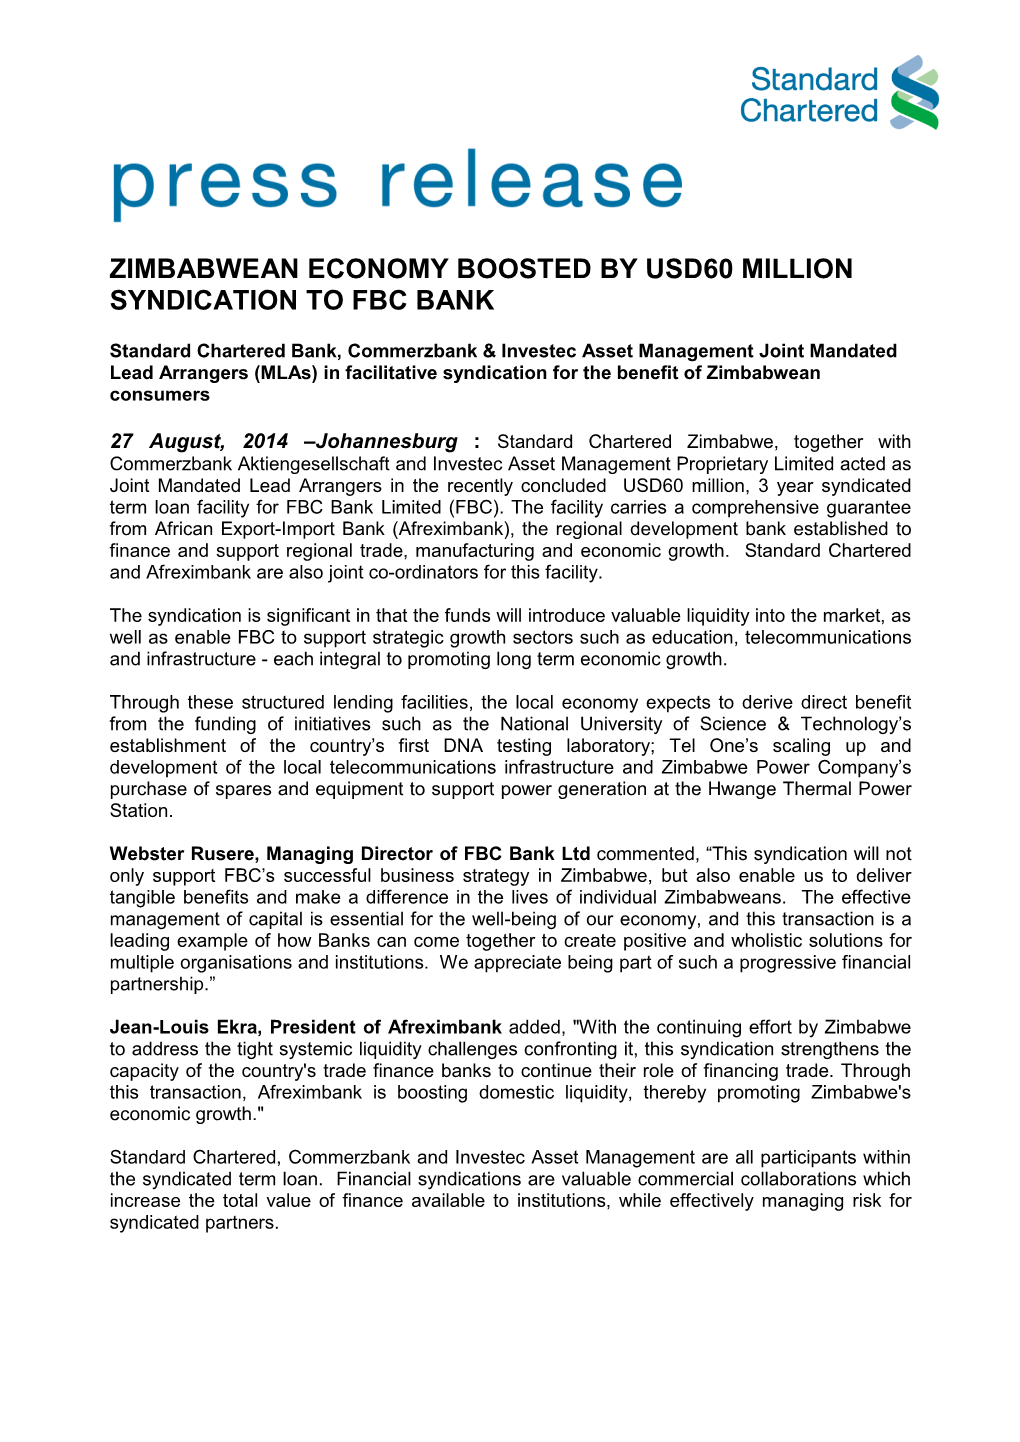 Zimbabwean Economy Boosted by Usd60 Million Syndication to Fbc Bank